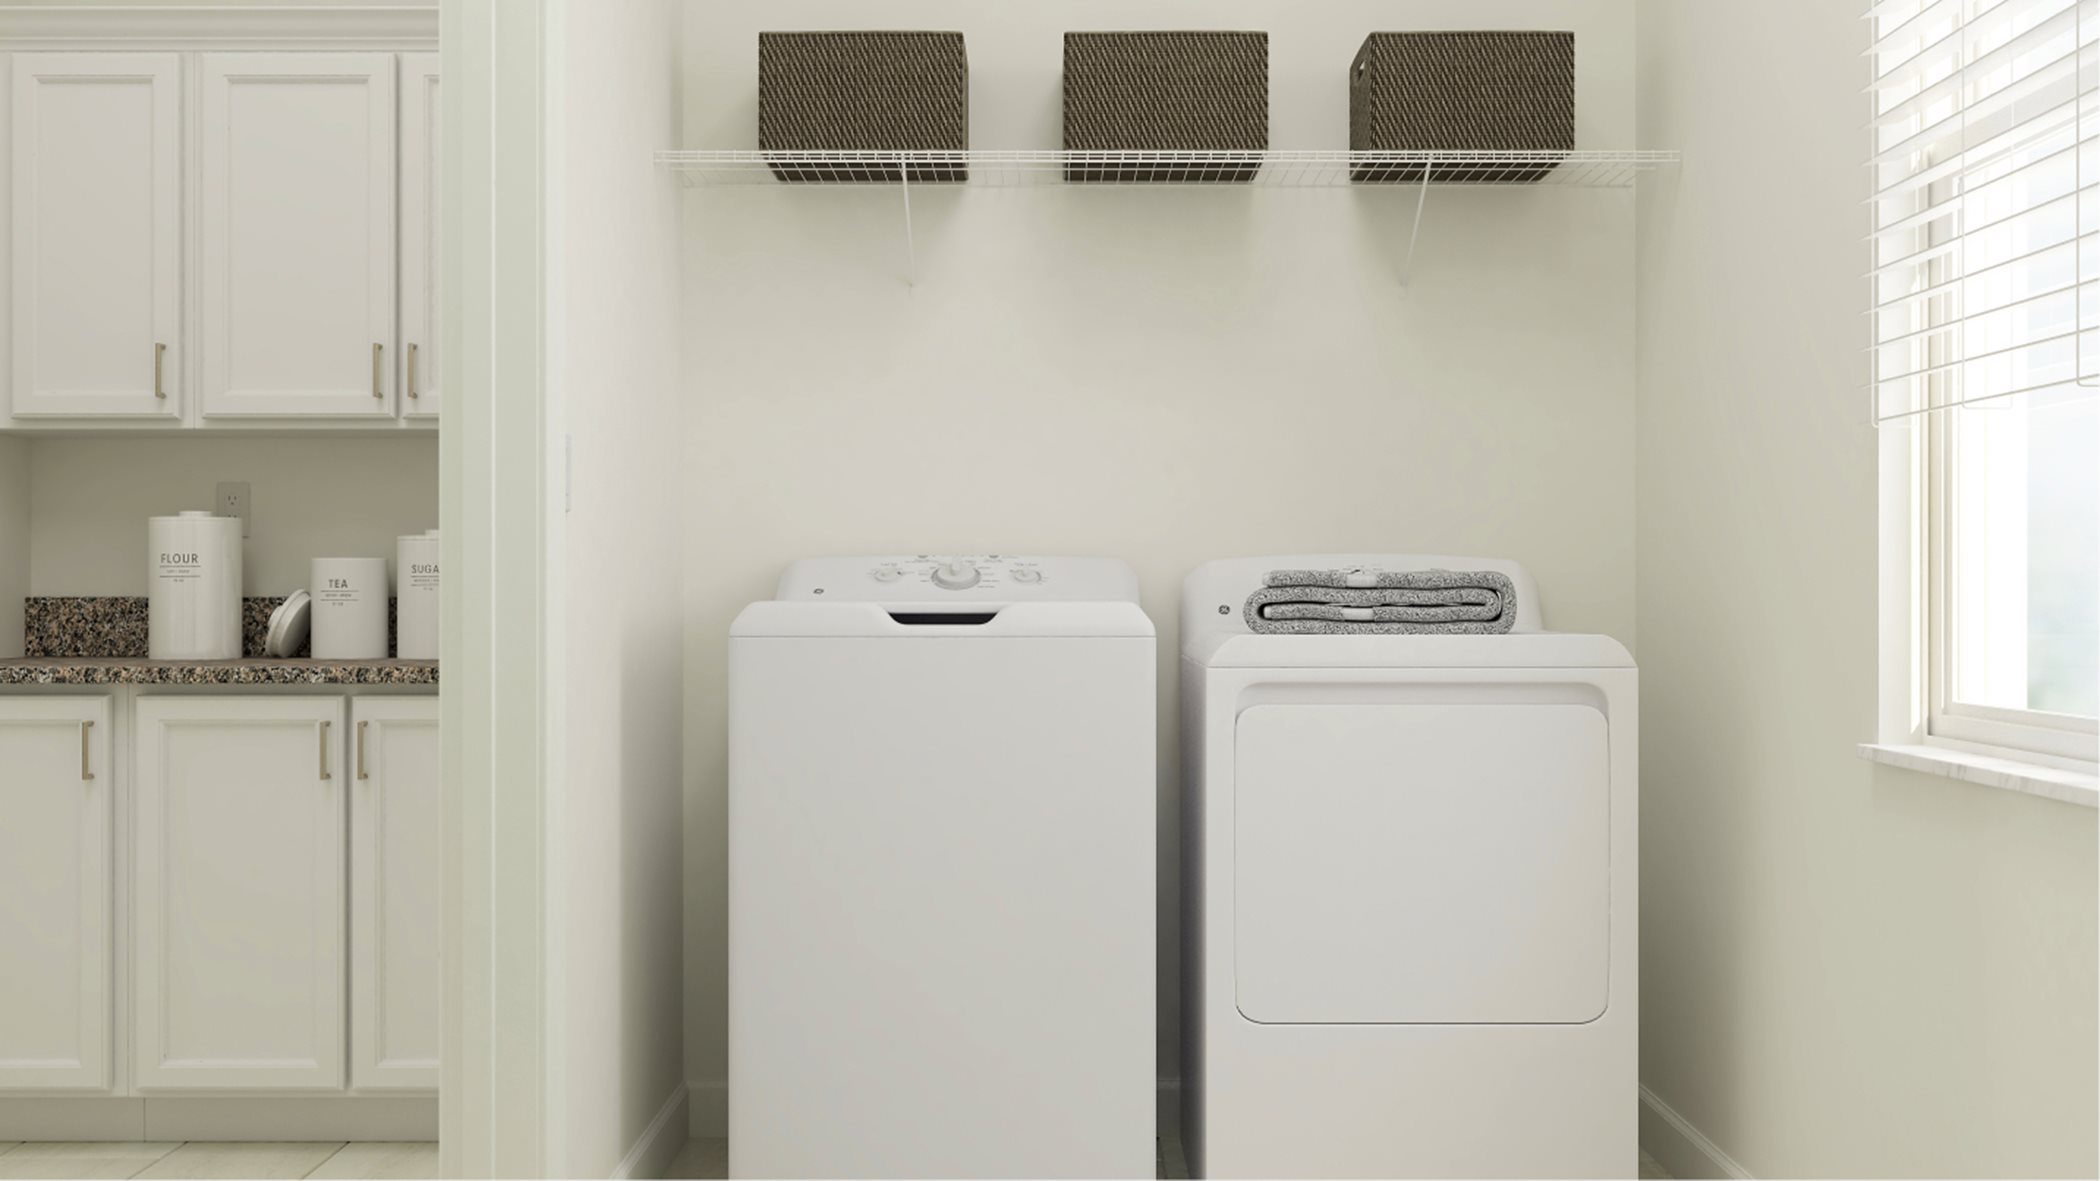 Eventide laundry room